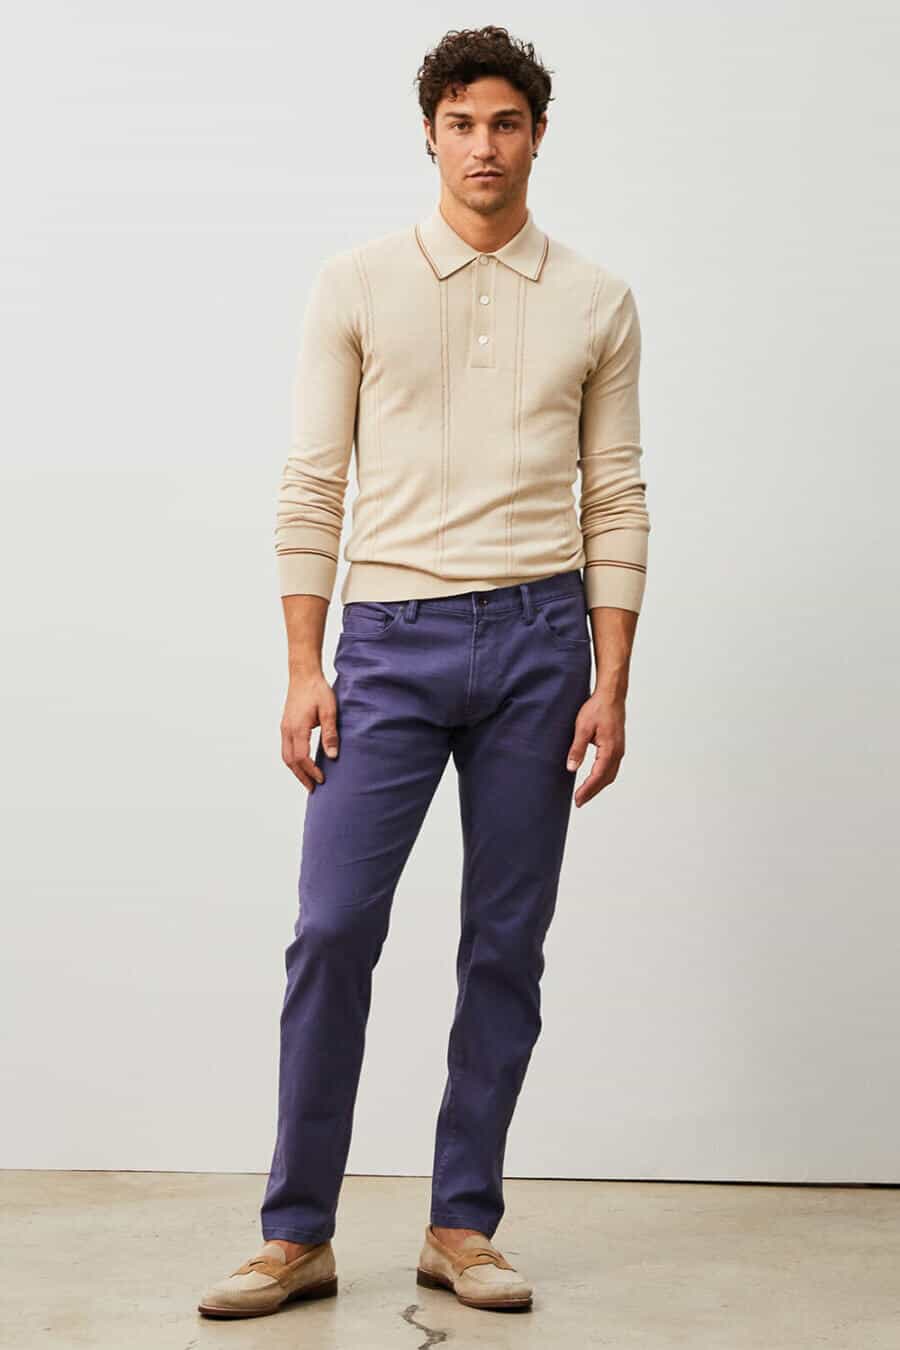 Men's long sleeve knitted polo shirt outfit with jeans and loafers